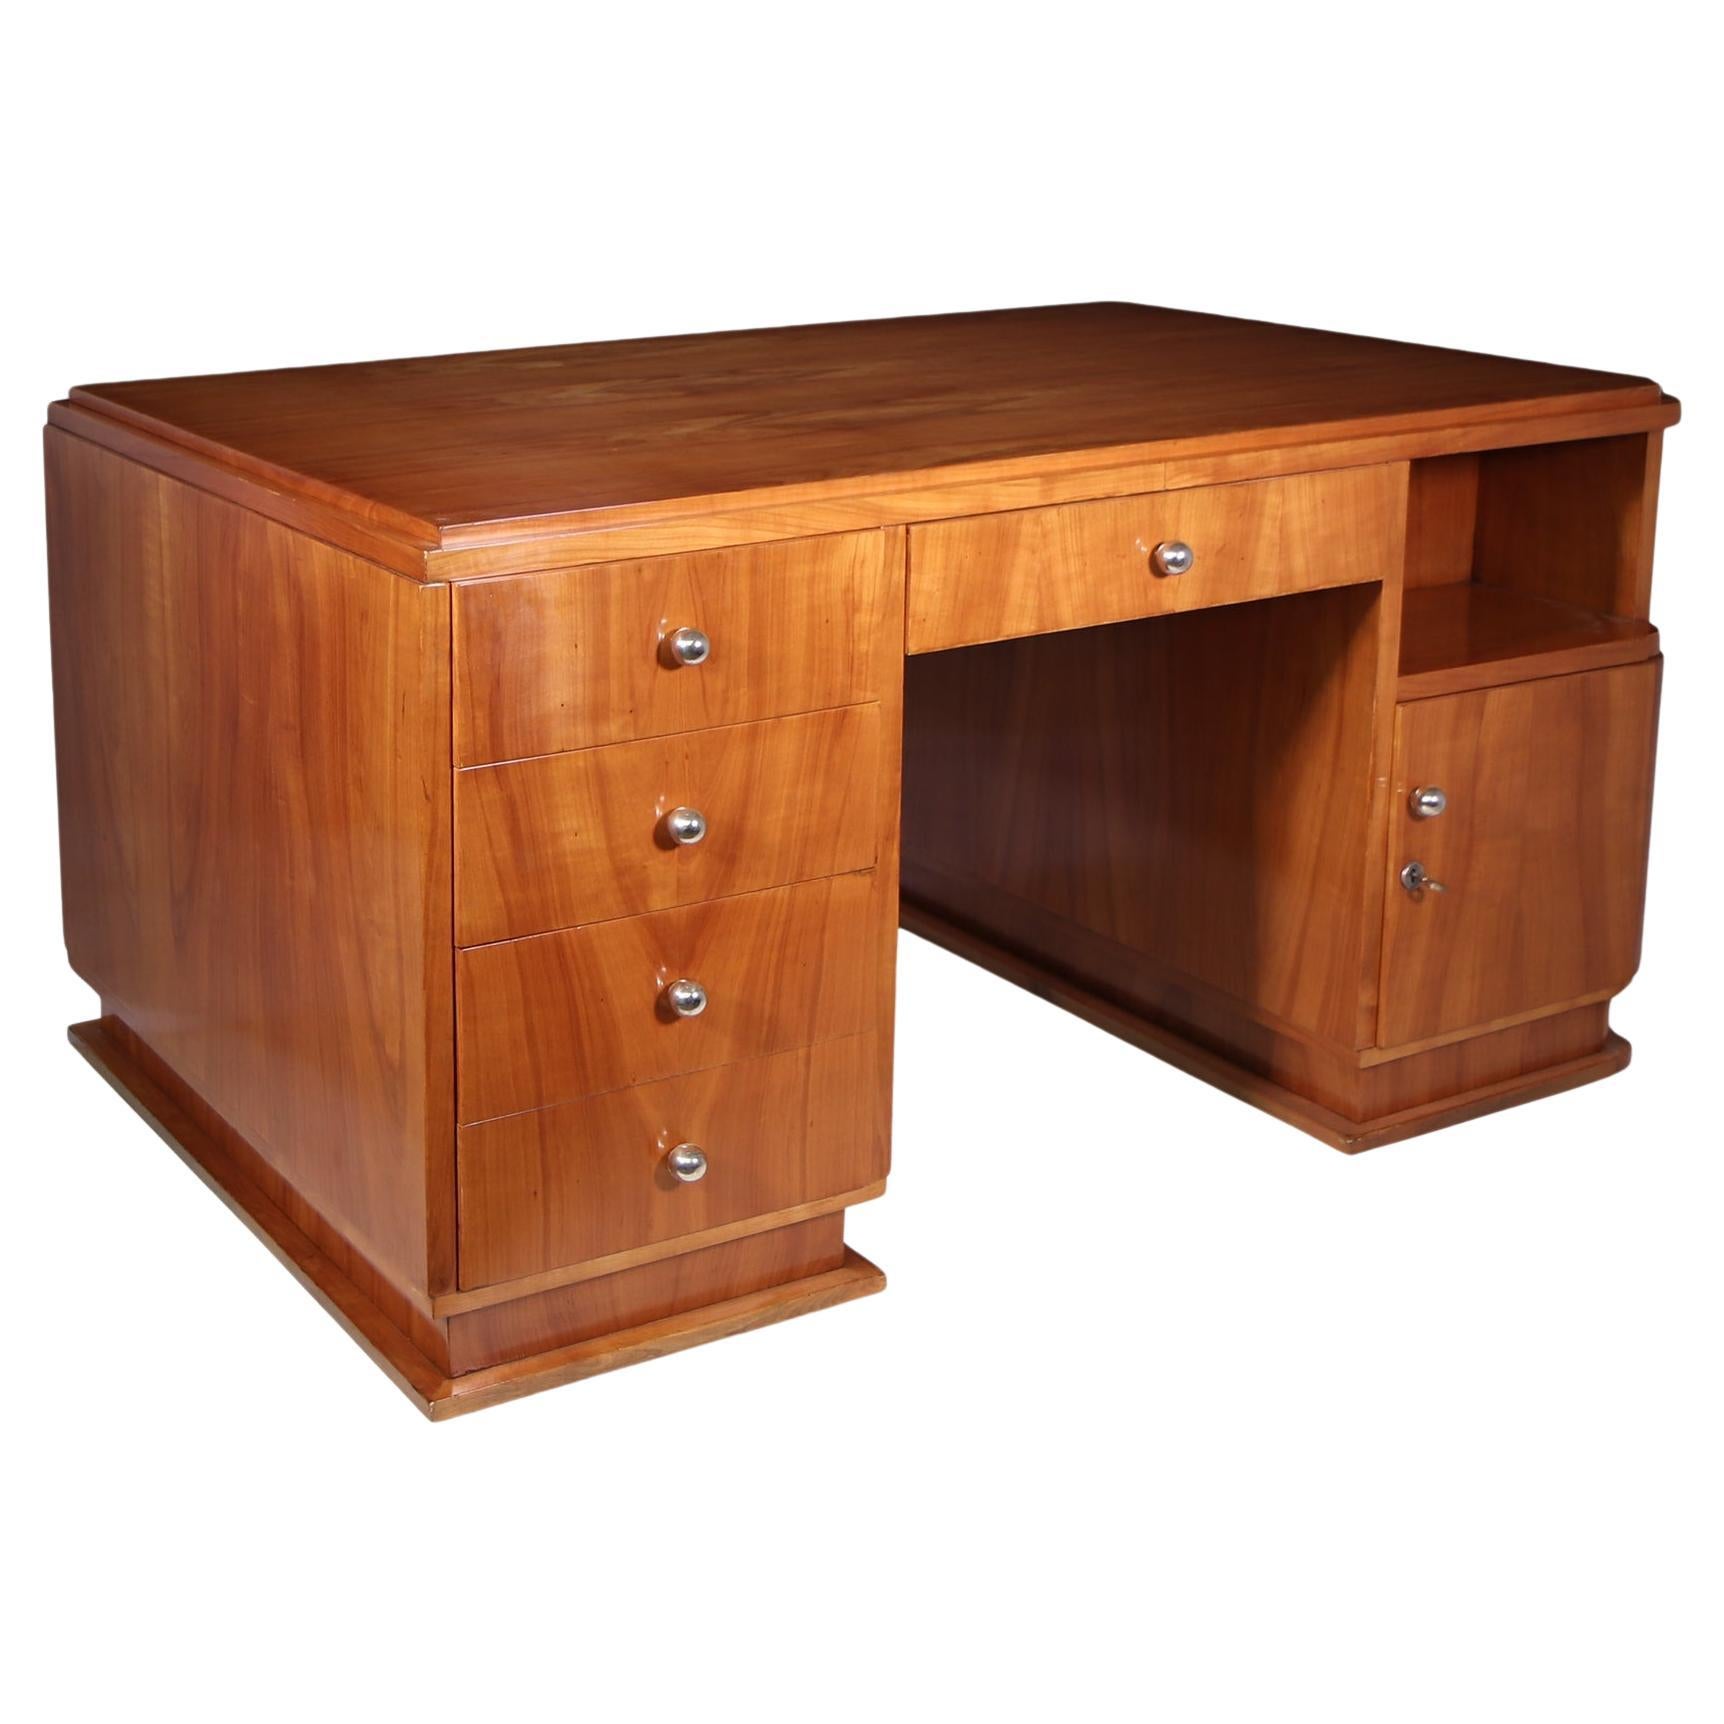 Large French Art Deco Desk in Cherry, c1930